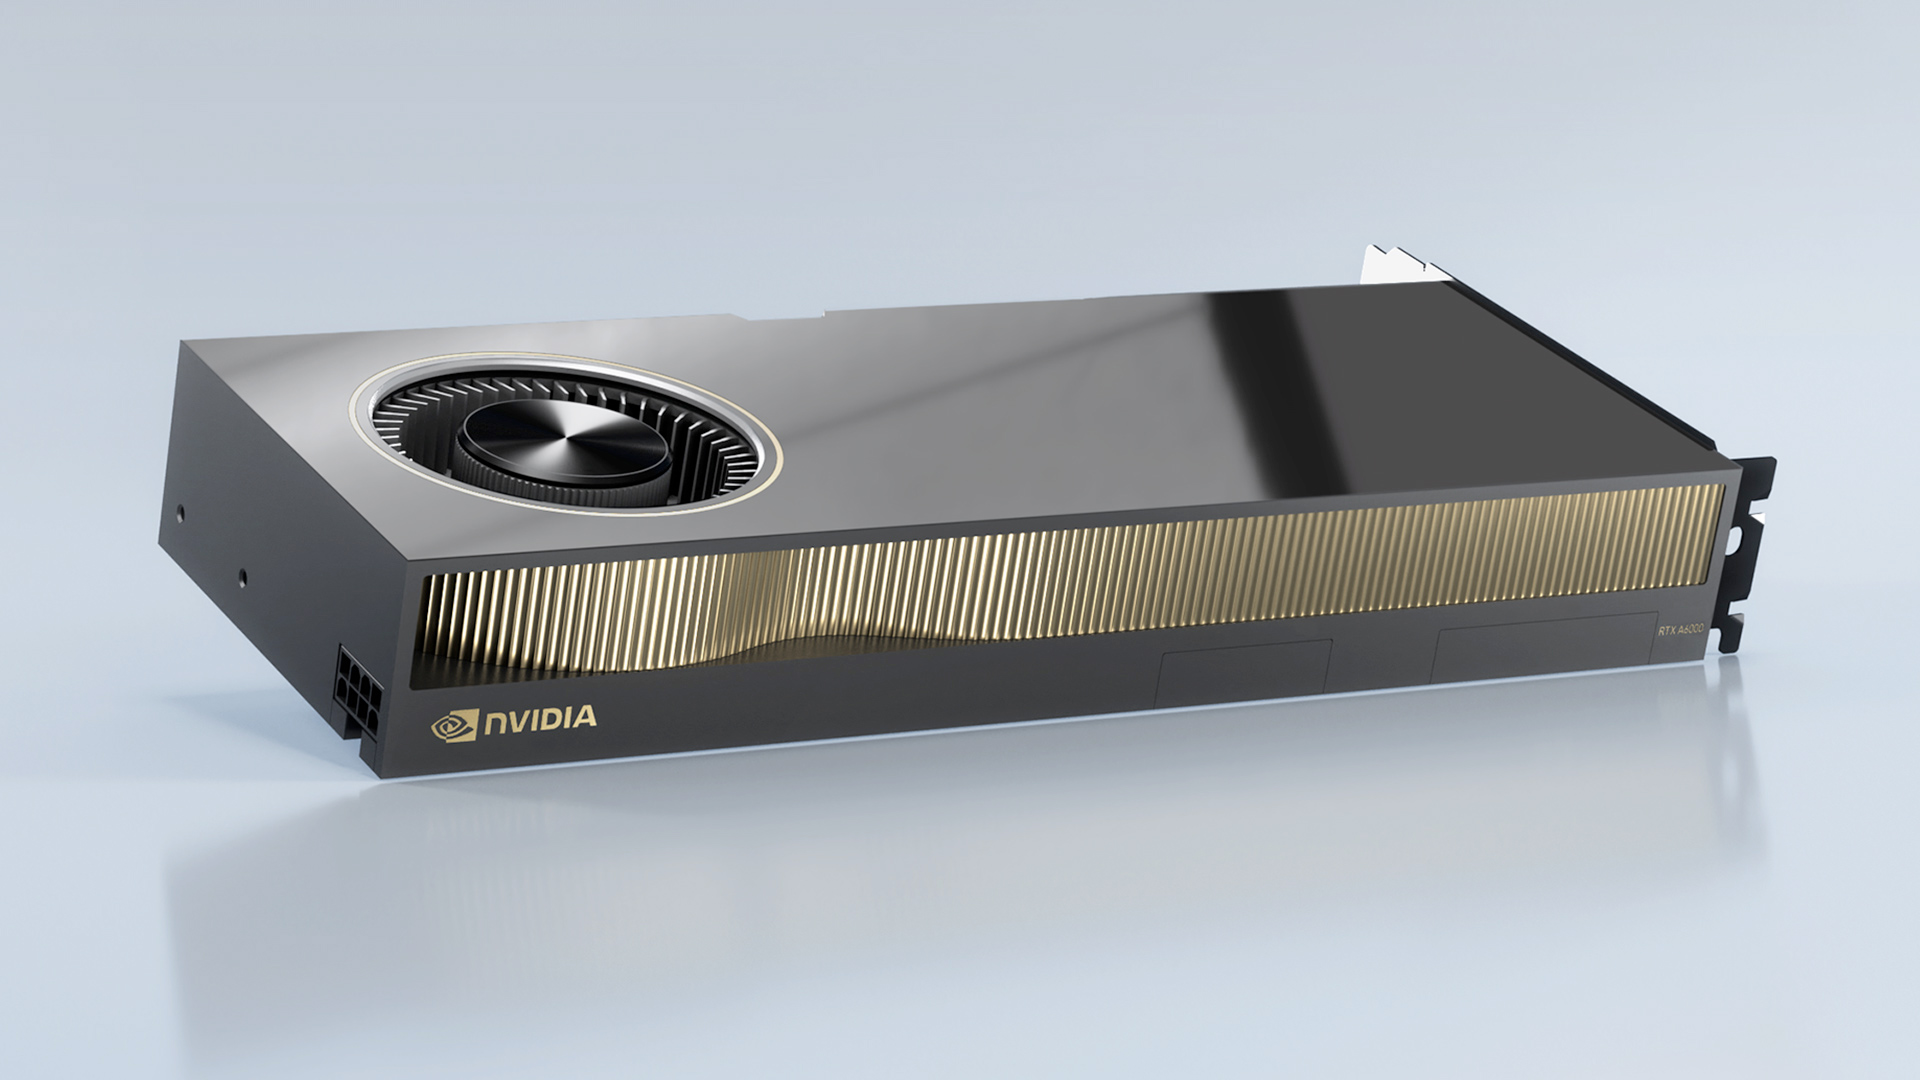 nvidia’s-rtx-a6000:-48gb-of-memory-powers-twice-the-performance